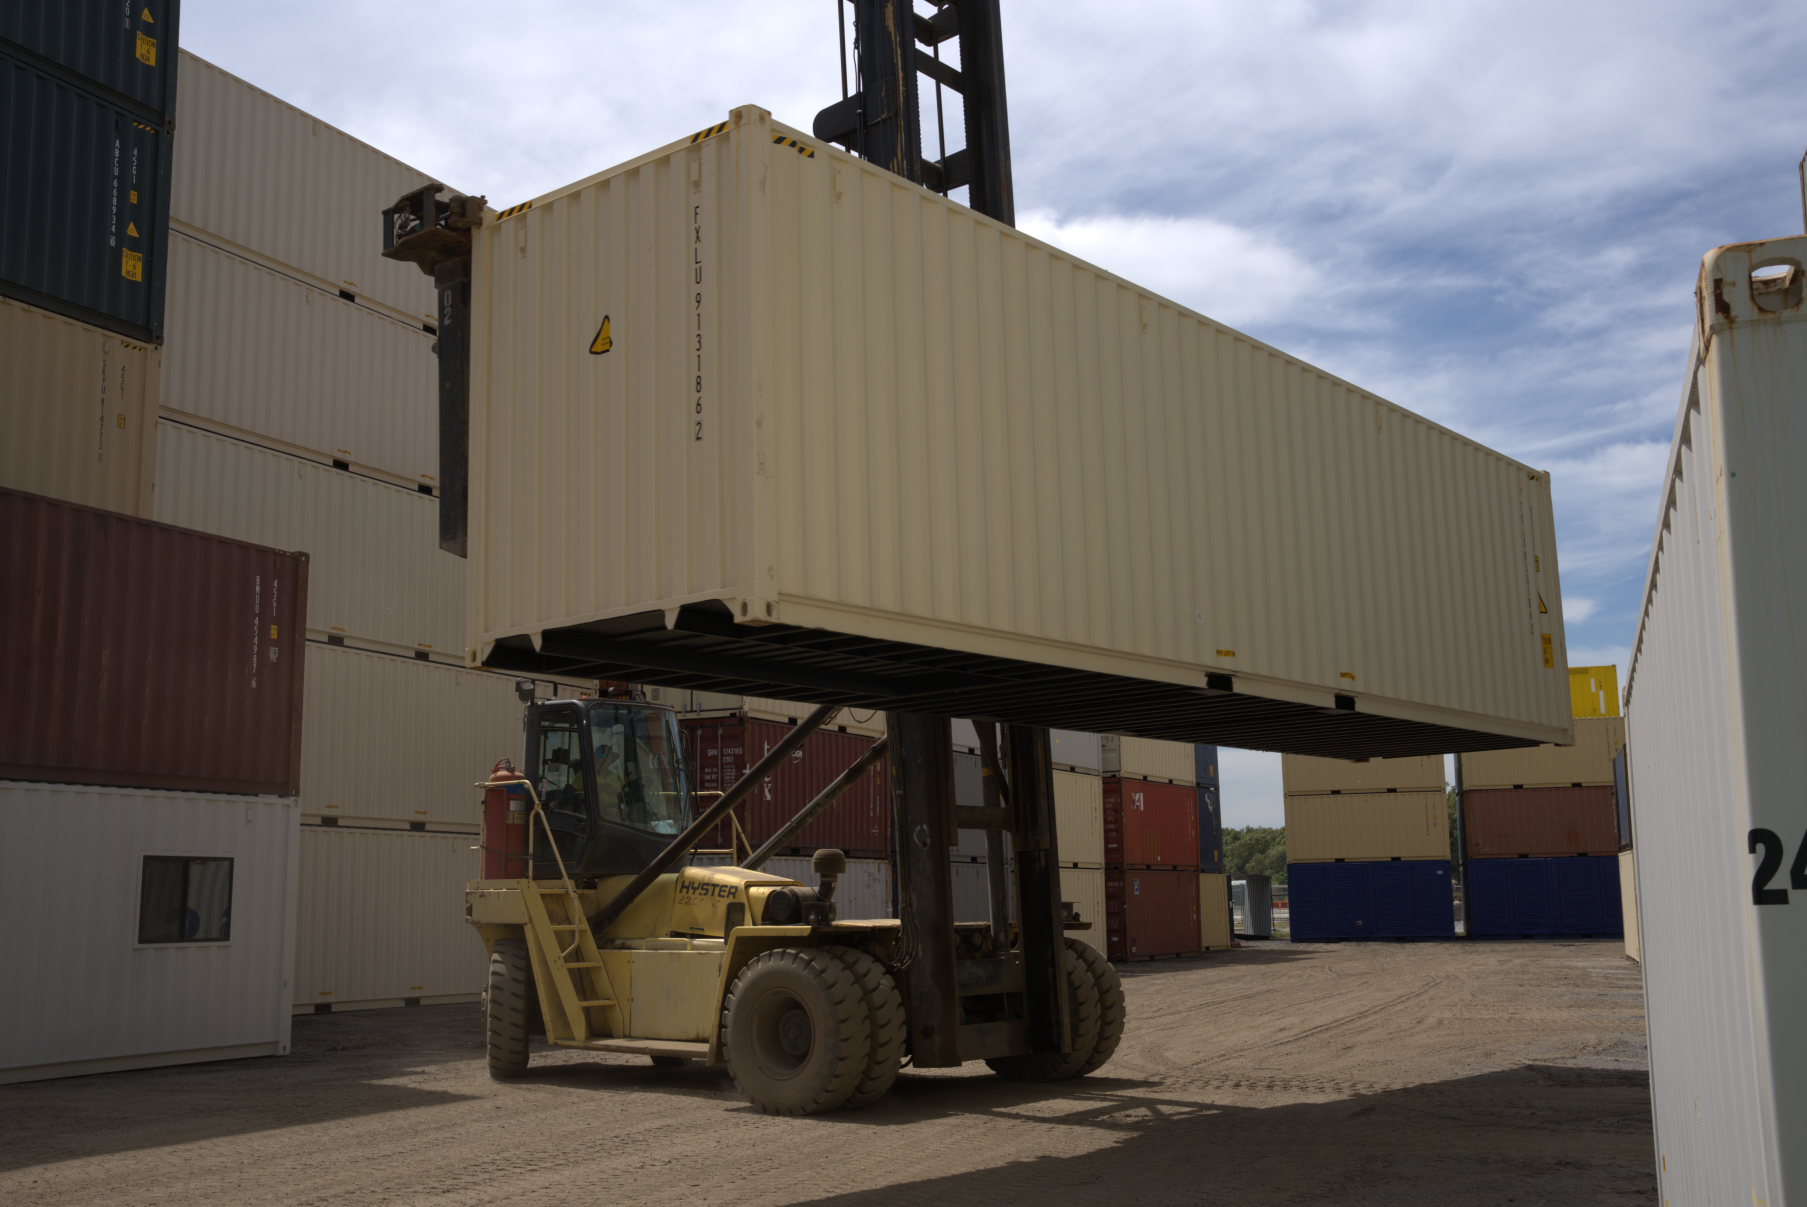 40ft shipping container held by a forklift